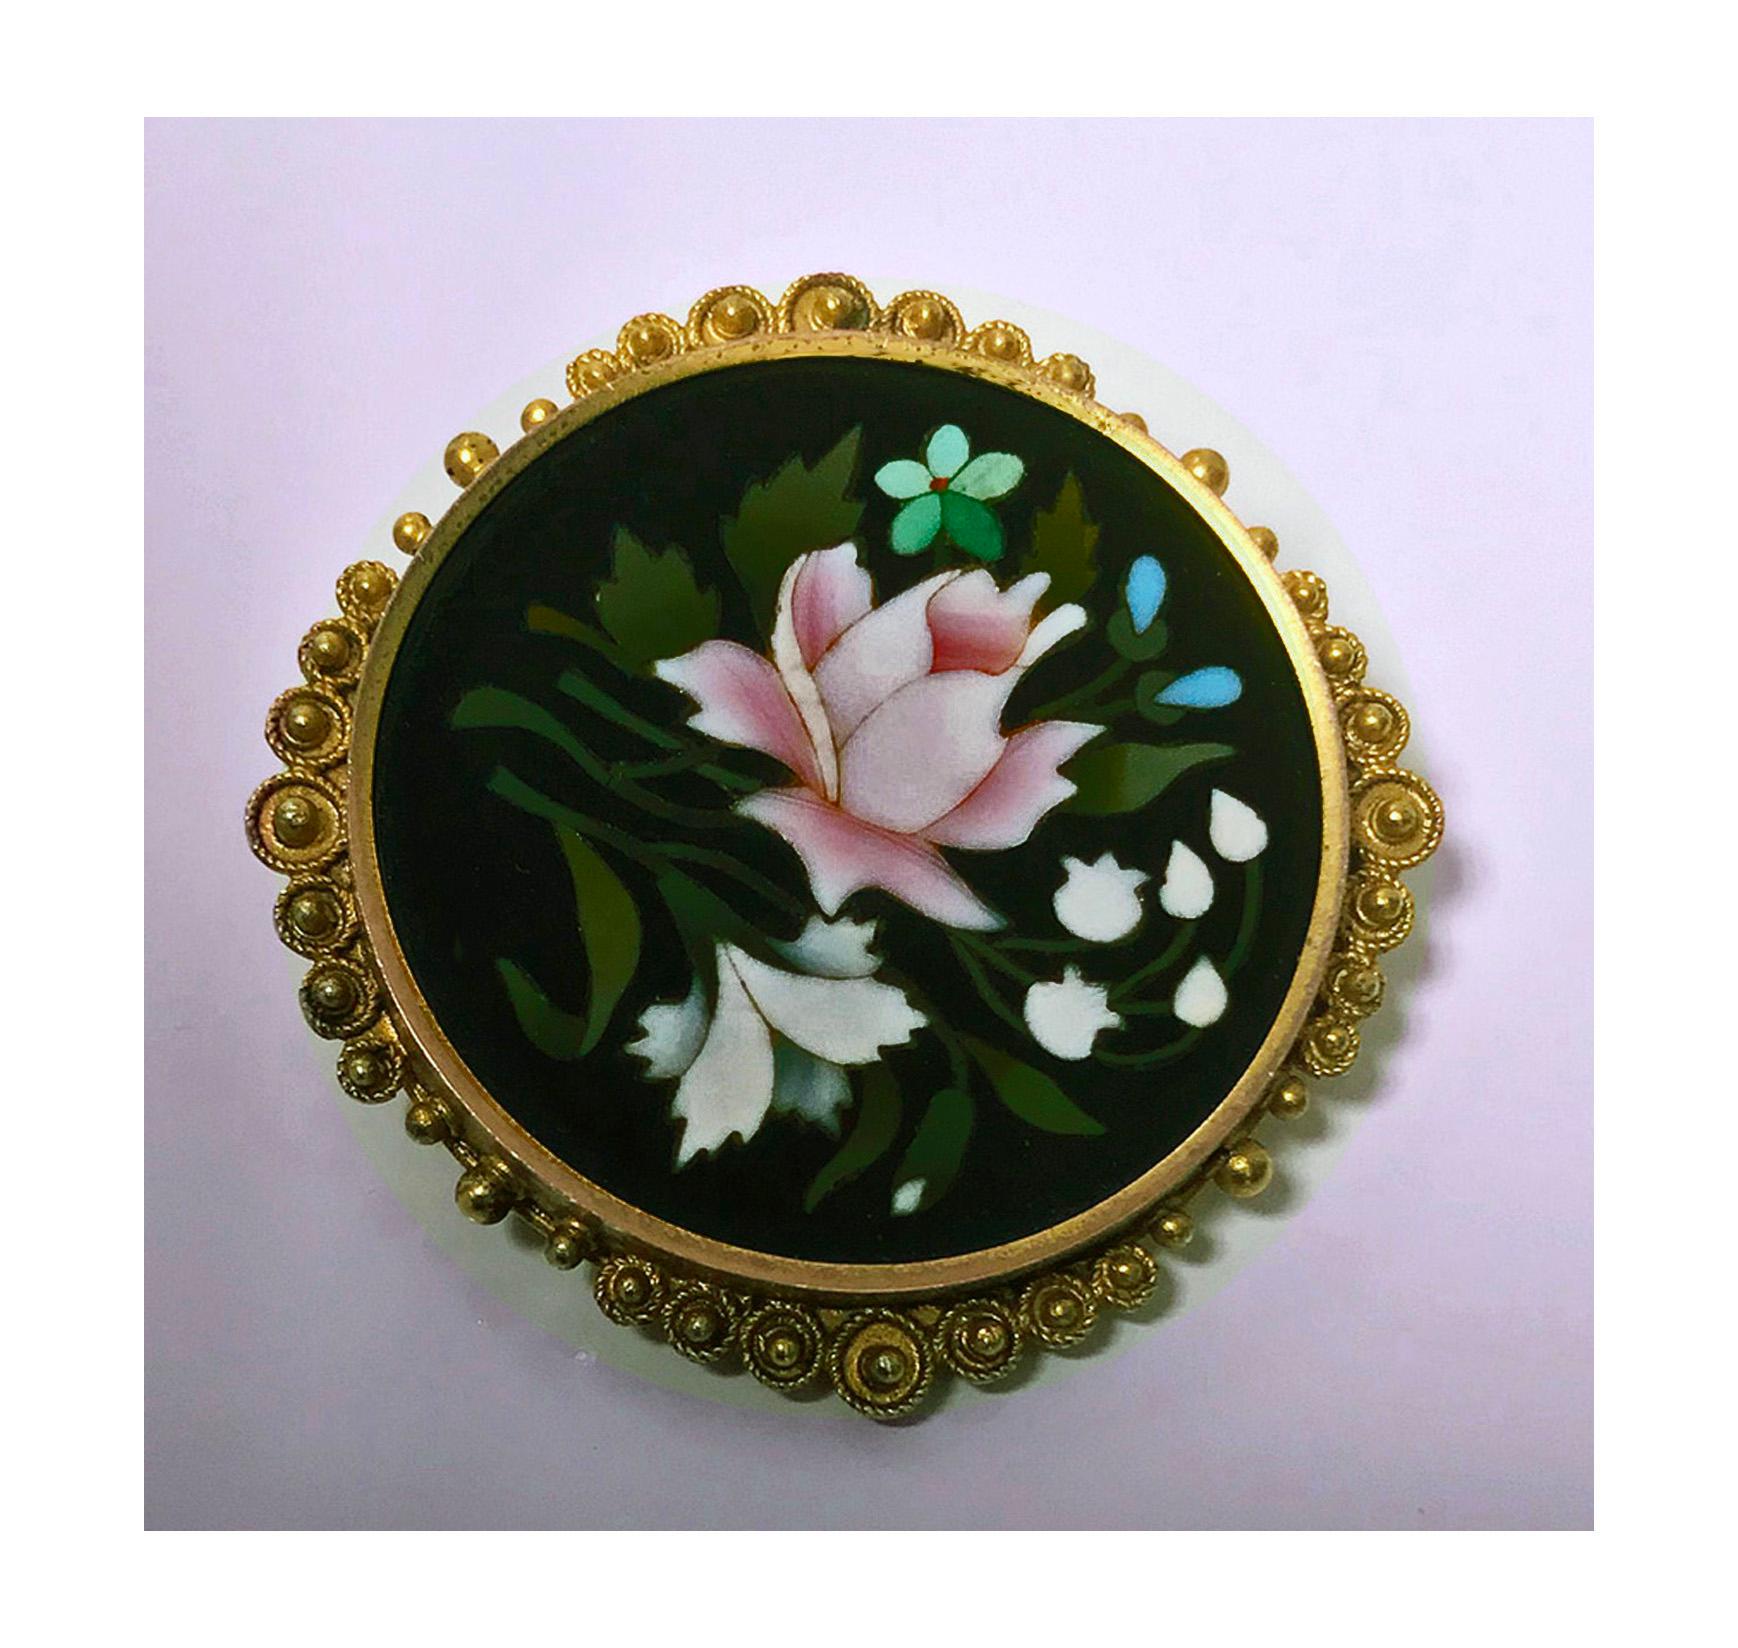 Antique 14K Gold Pietra Dura Brooch Pin, Italy C.1875. The Brooch of circular shape, fine pietra dura floral white, green, lilac inlay colors, the surround gold mount of granular etruscan bead work. Gold acid tests 14K. Diameter: 1.2 inches. Total